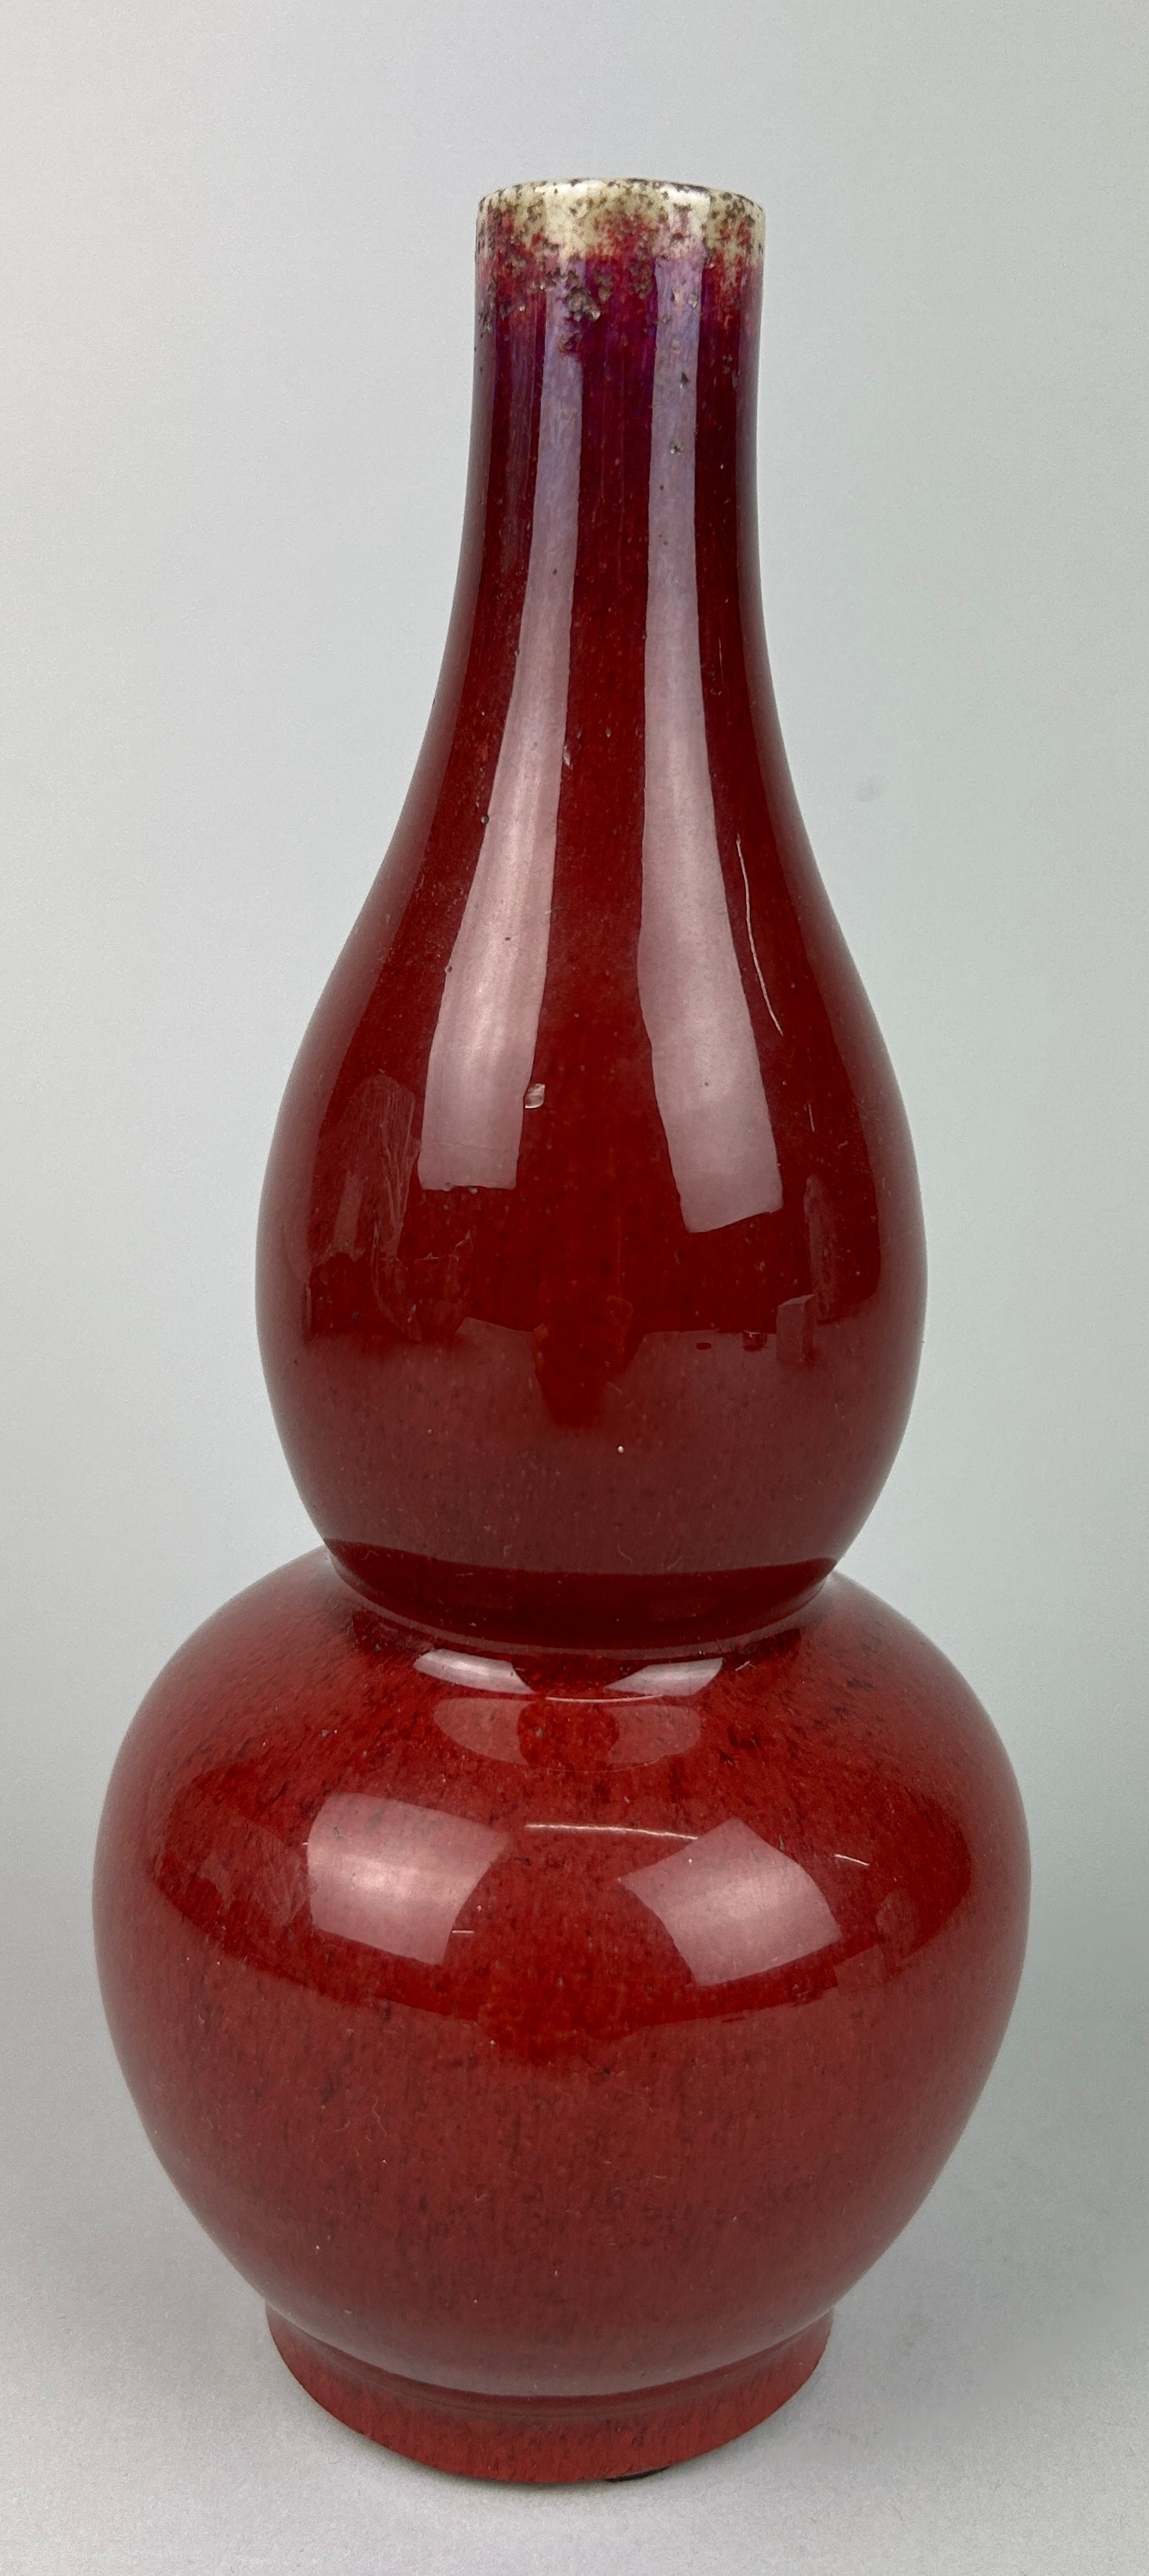 A 19TH CENTURY CHINESE PORCELAIN SANG DE BOUEF OR LANGYAO GLAZED DOUBLE GOURD VASE, 21cm x 8.5cm - Image 4 of 5